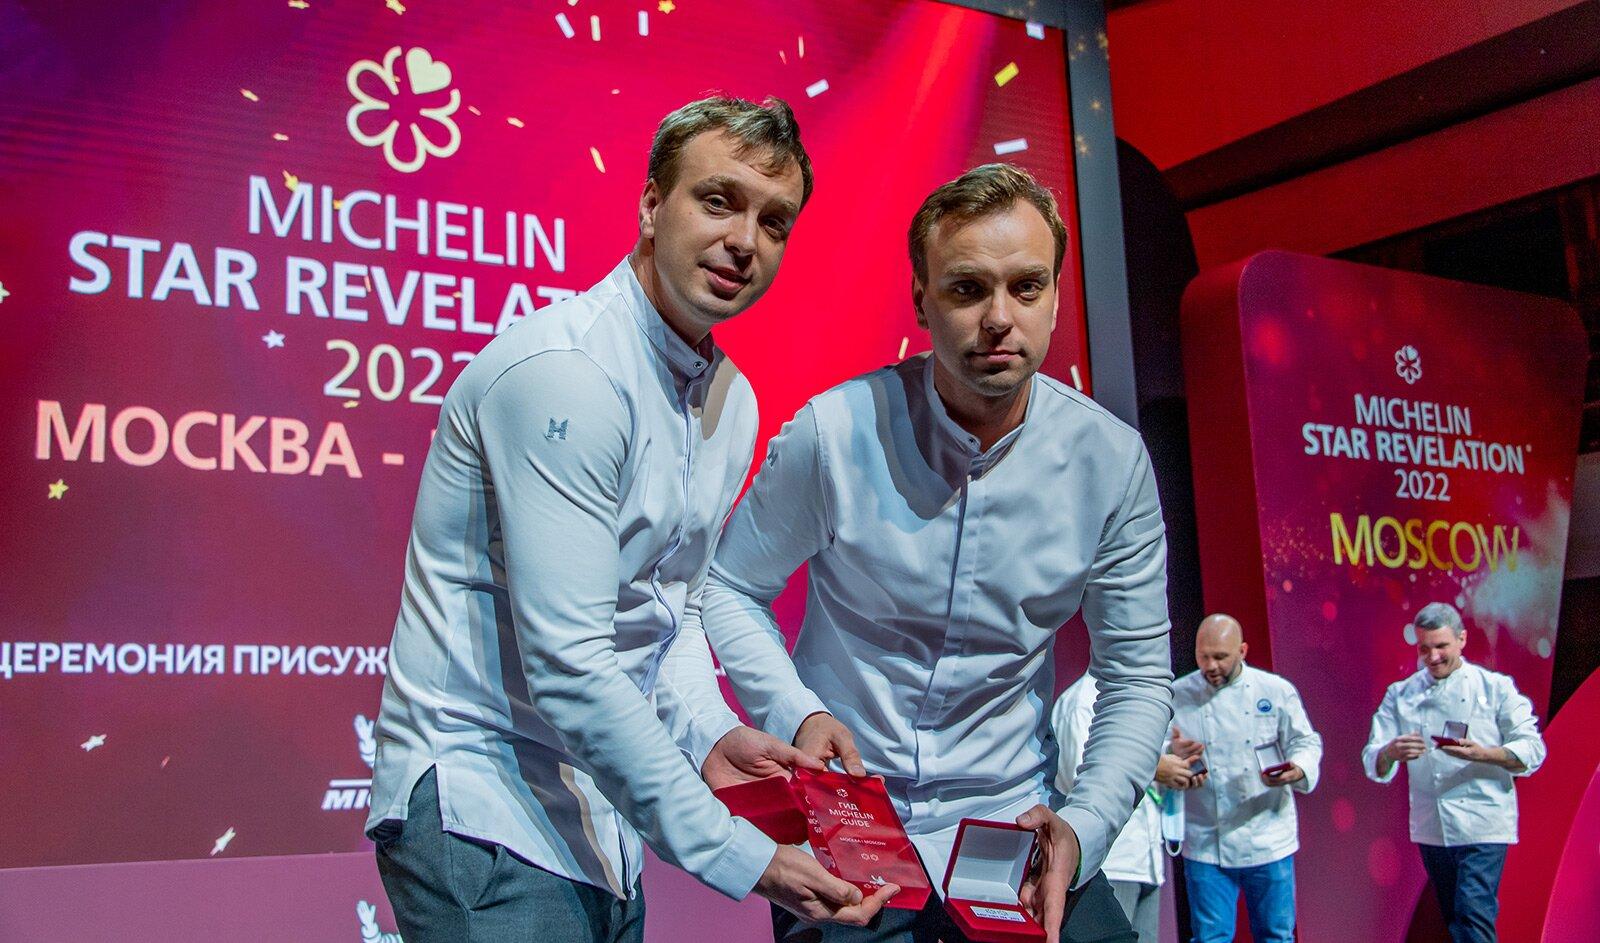 other_590_37184_michelin_ceremony_moscow_11.jpeg